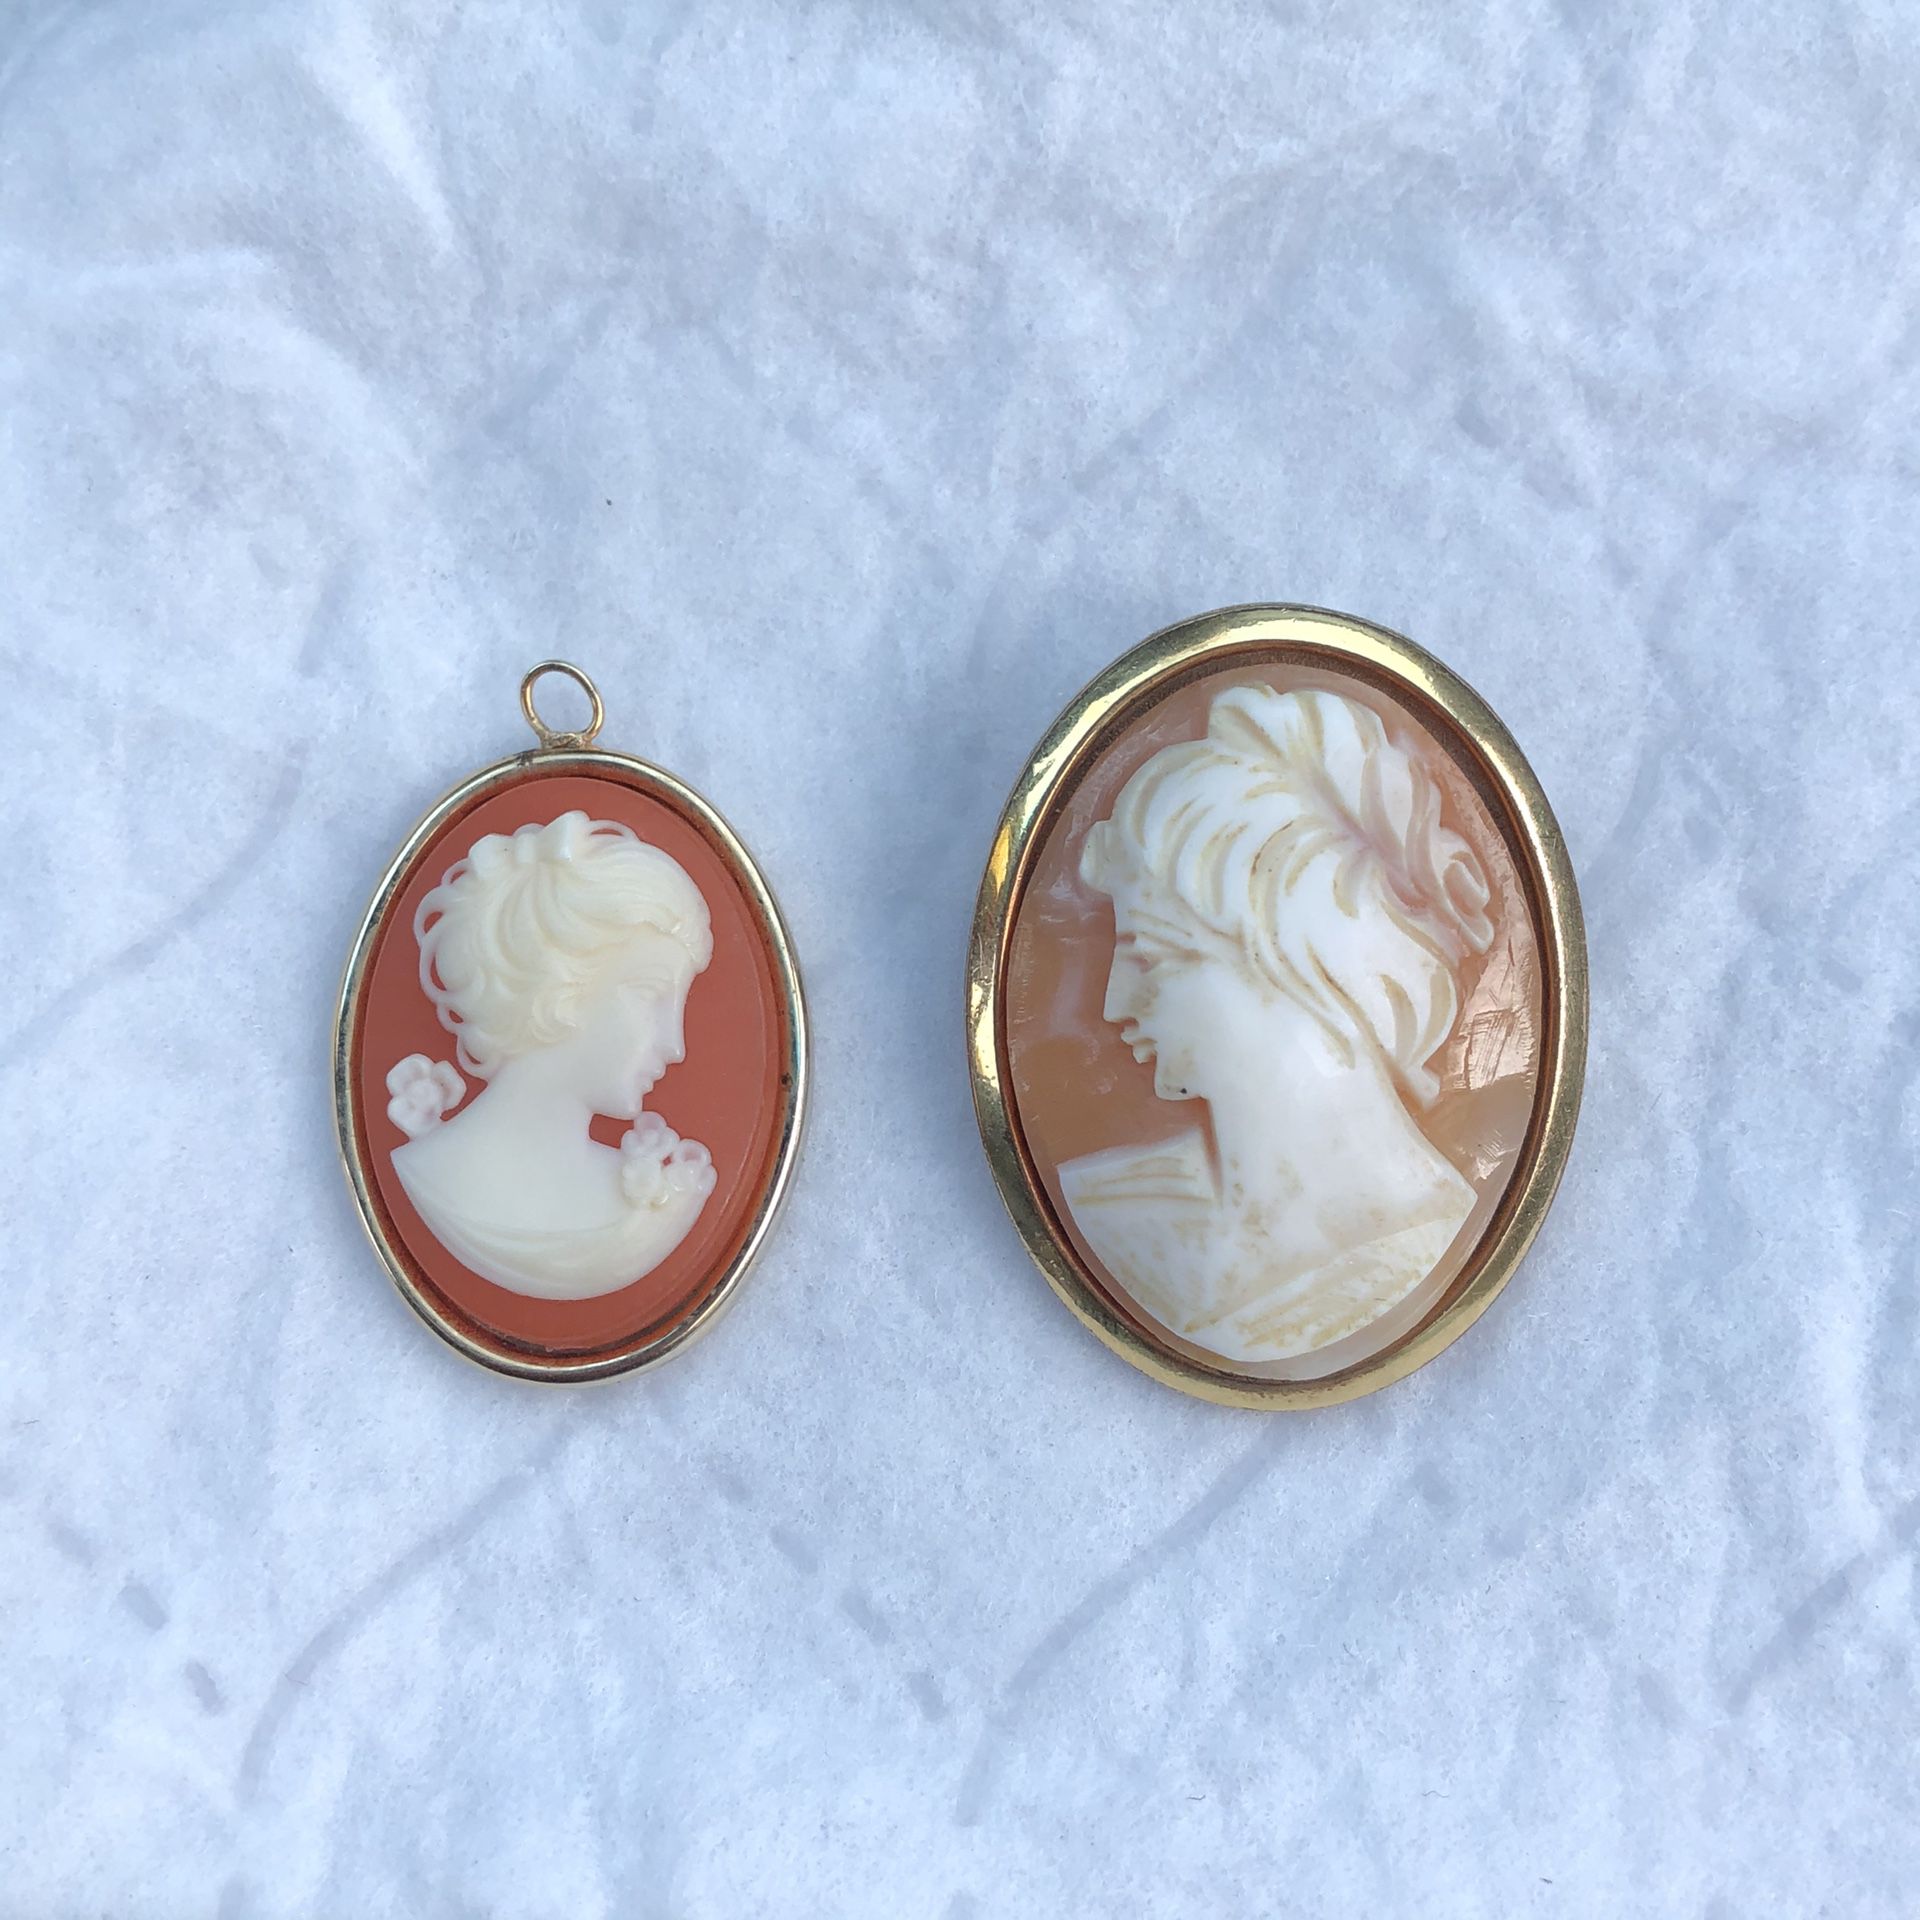 Vintage cameo brooch and pendant